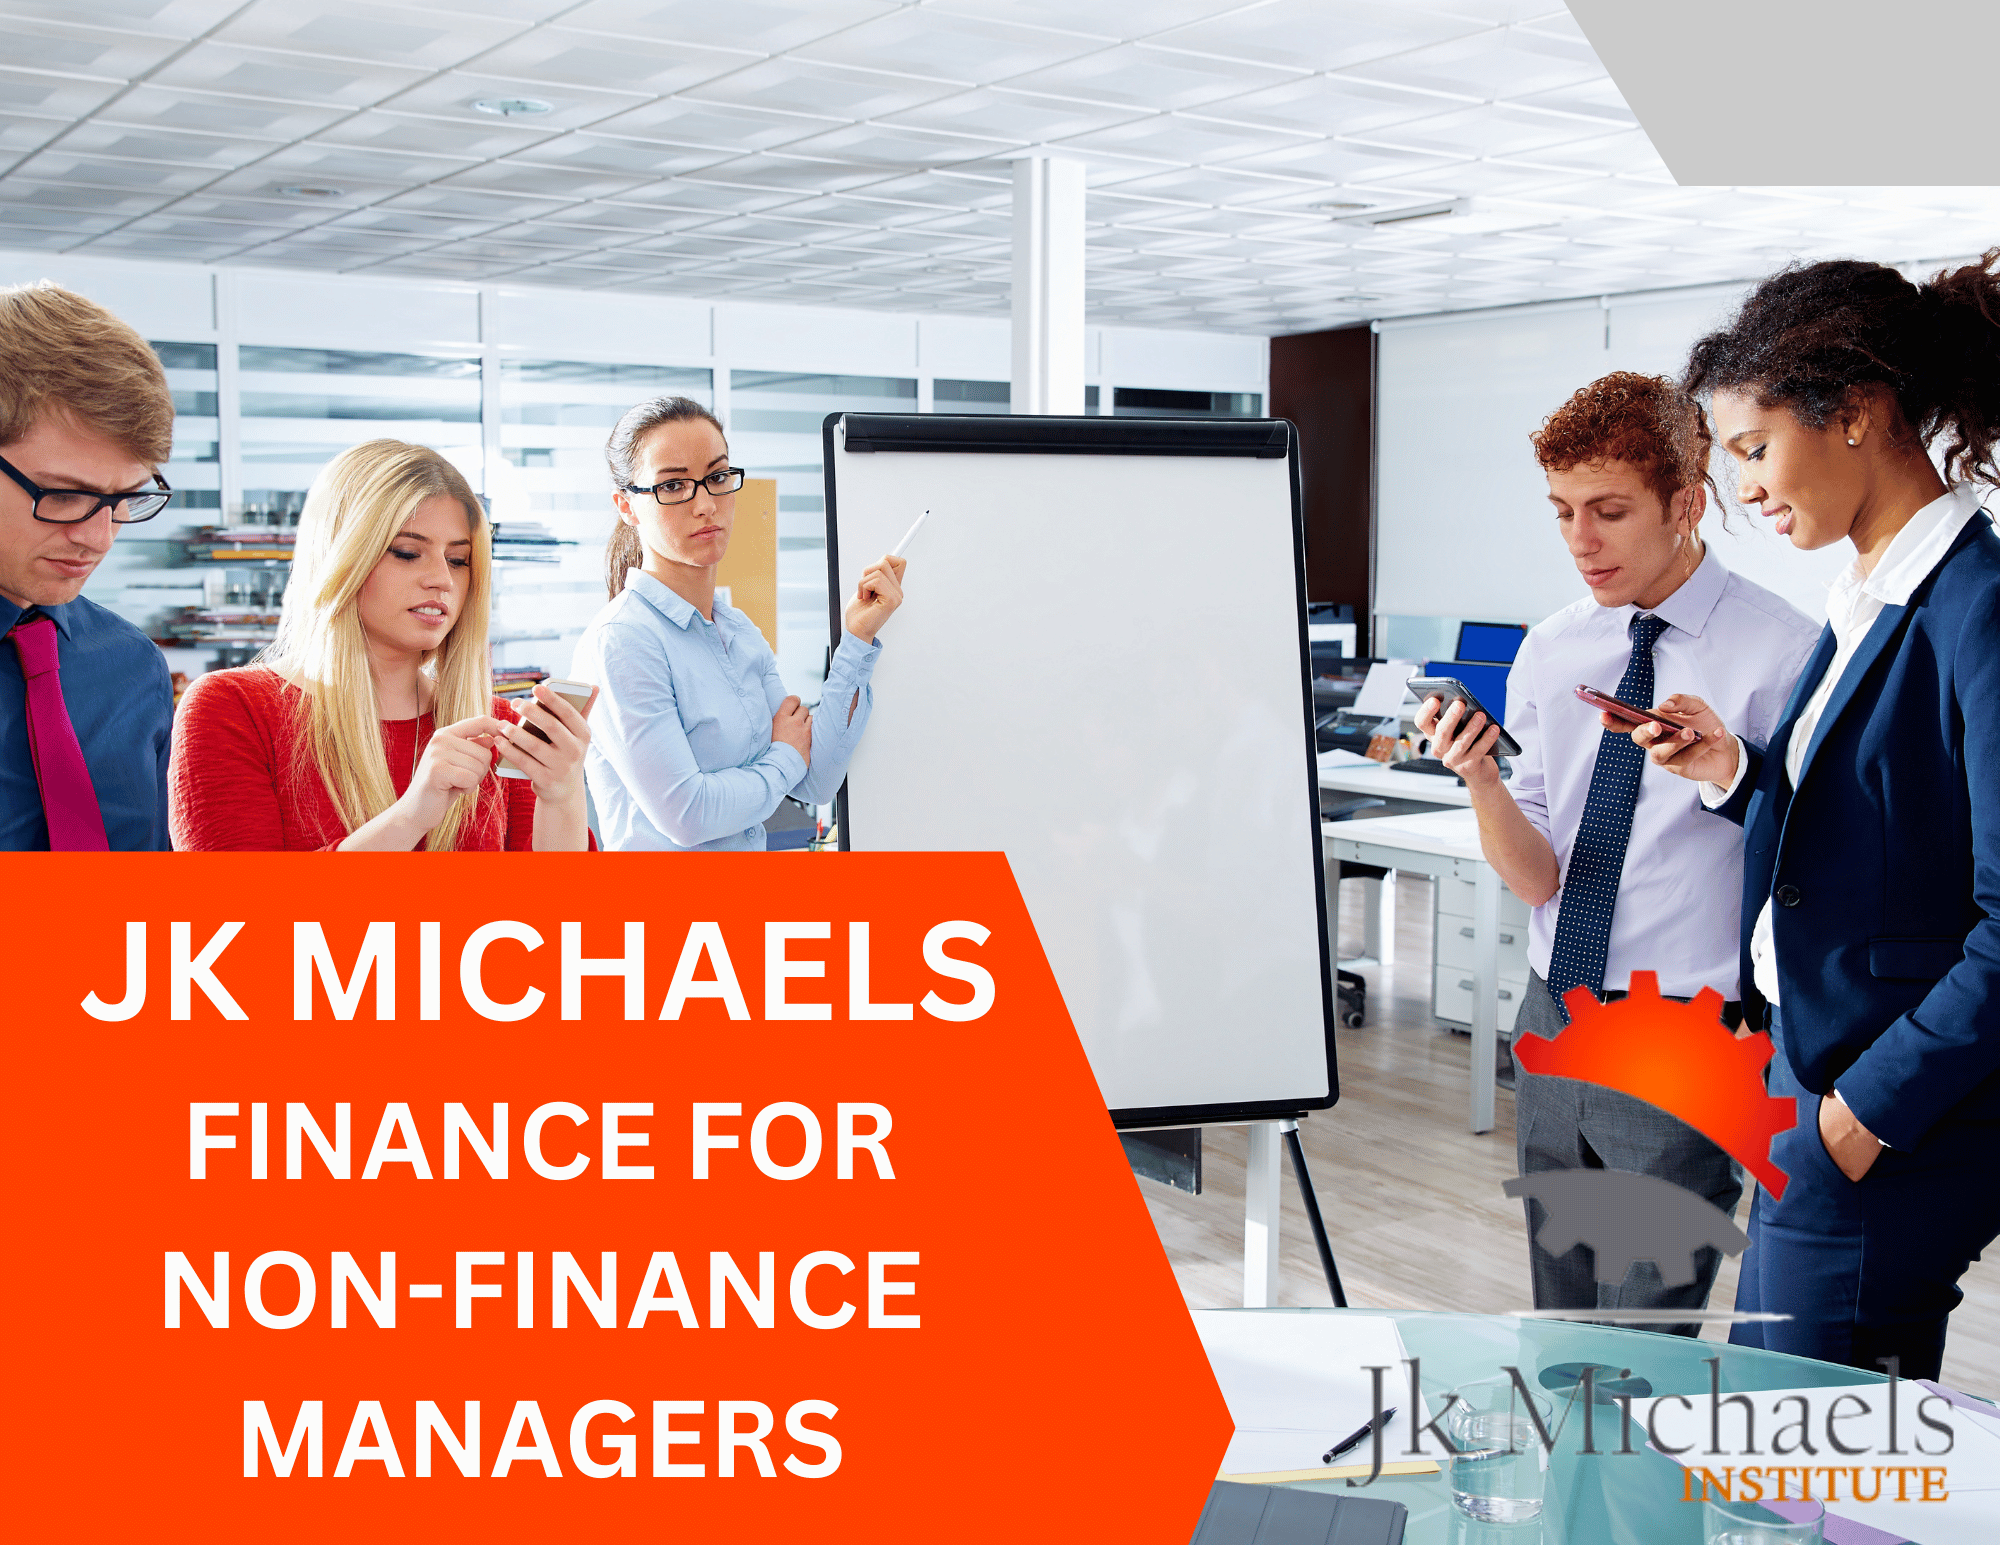 FINANCE FOR NON-FINANCE MANAGERS